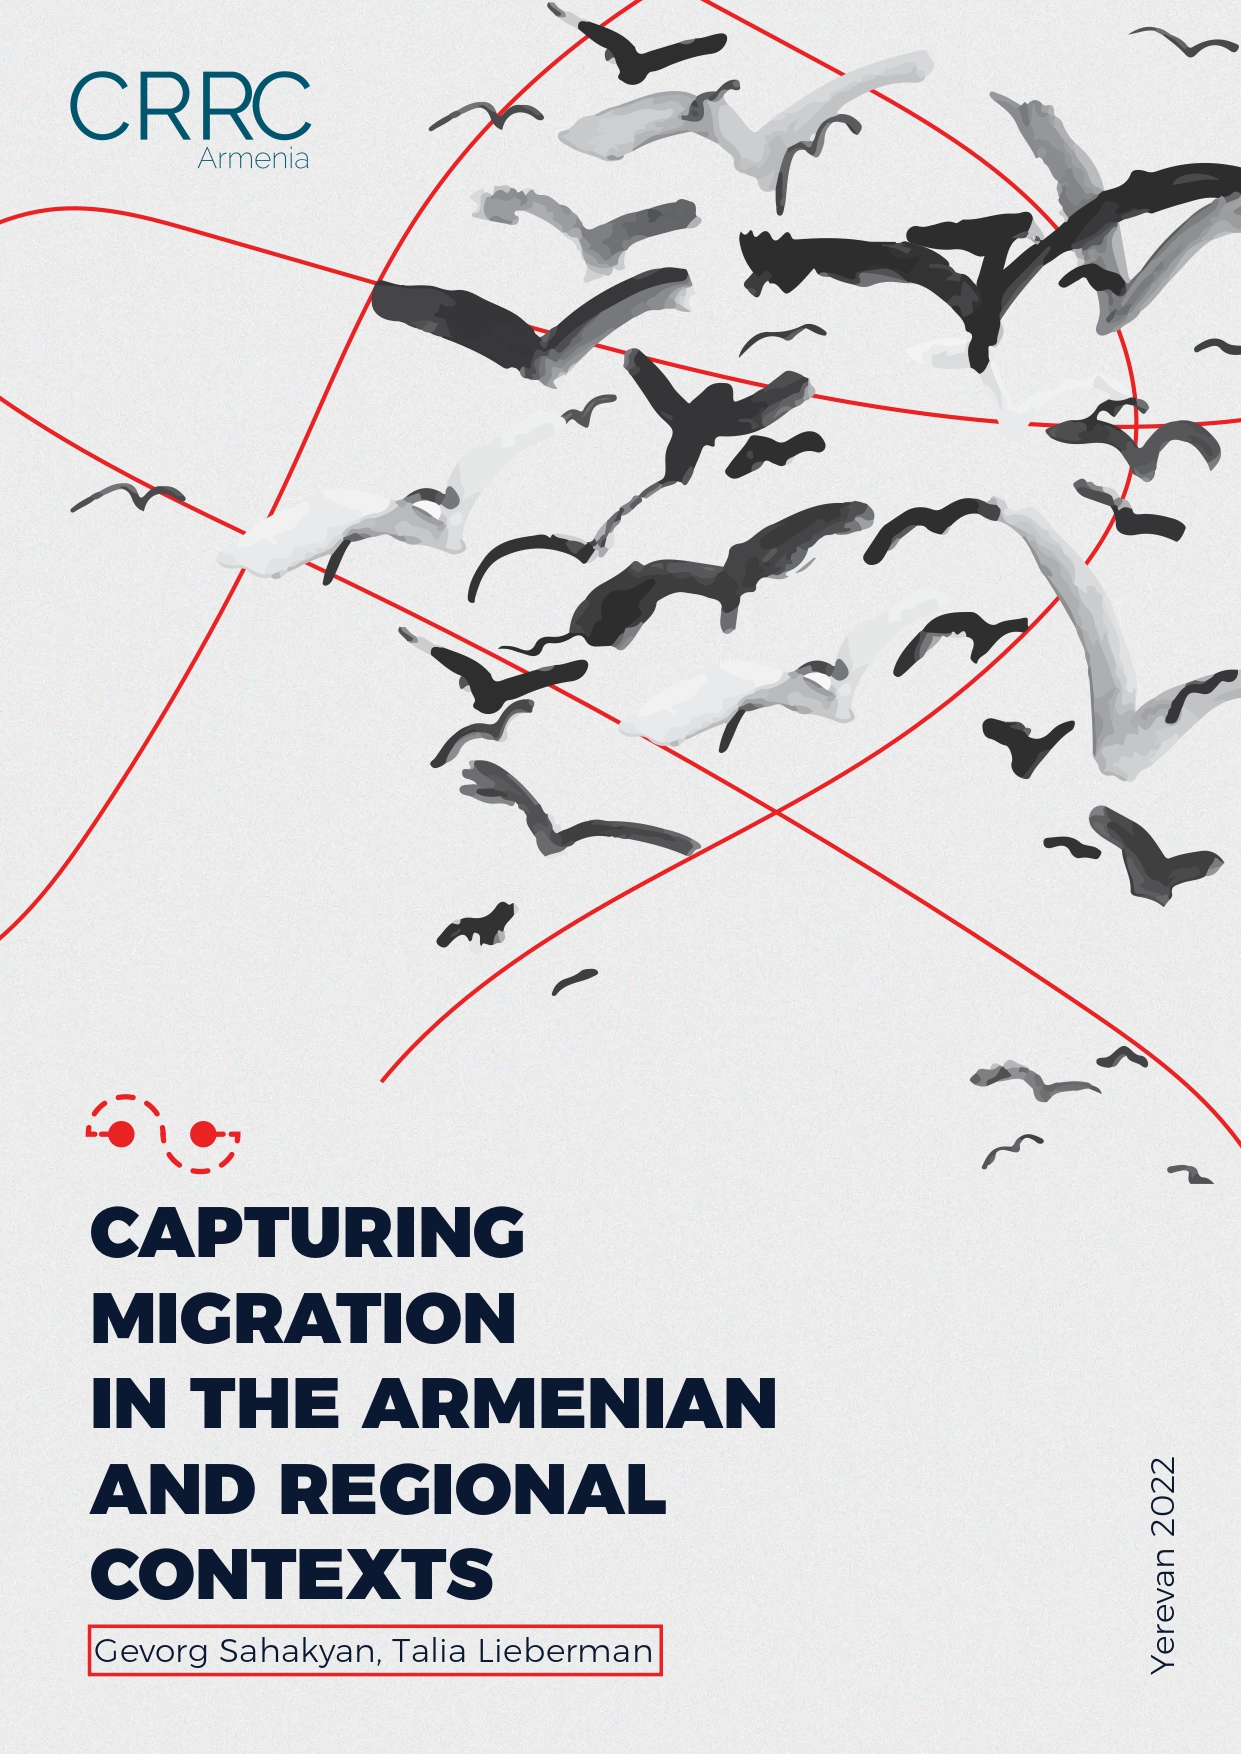 Capturing migration in the Armenian and regional contexts